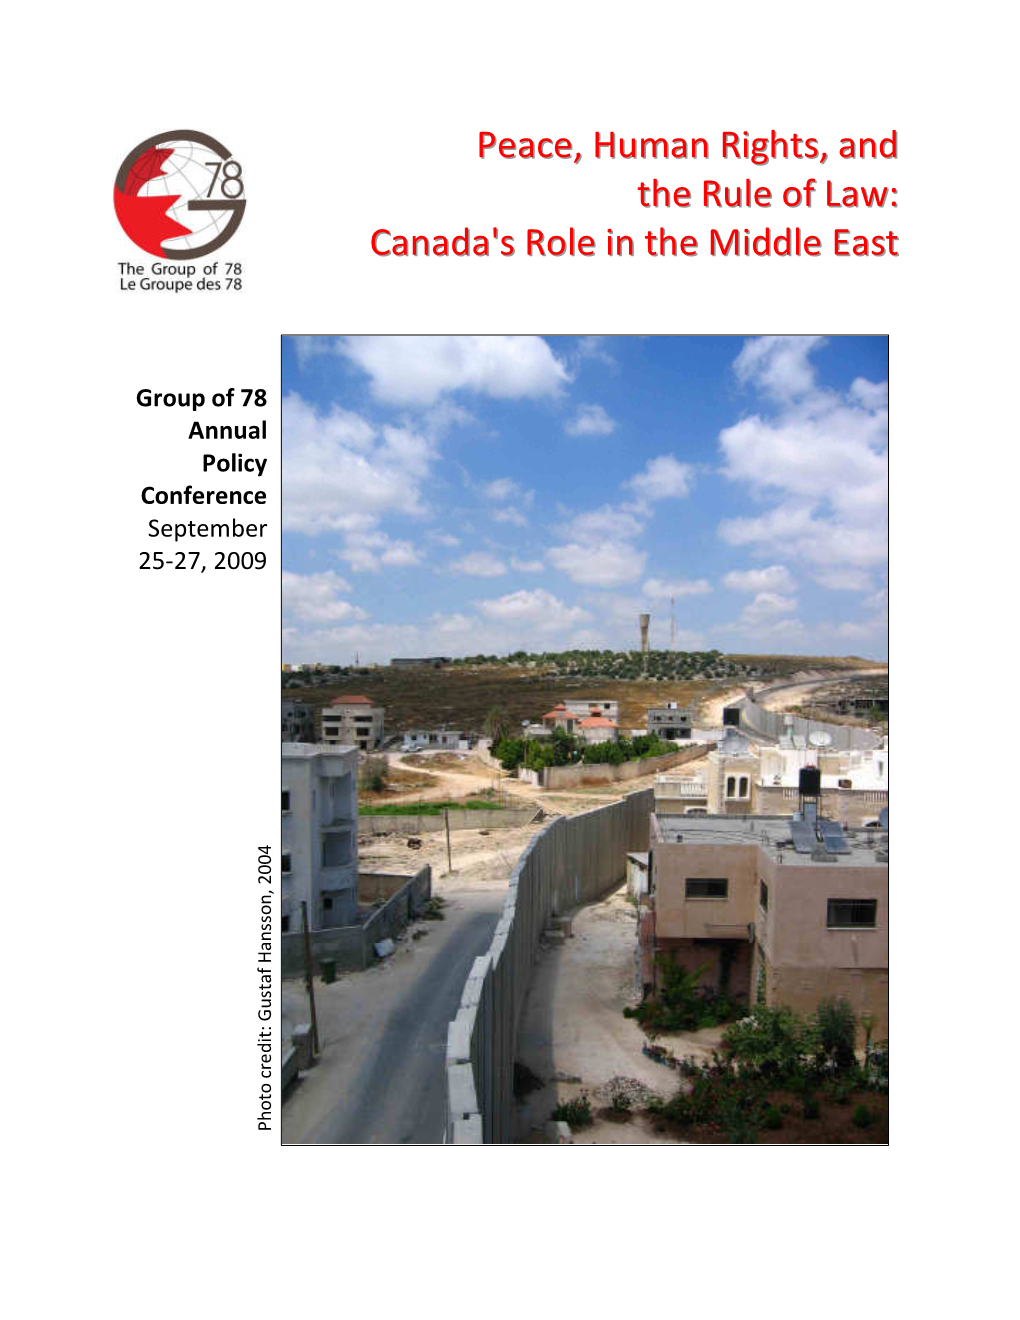 Peace, Human Rights, and the Rule of Law: Canada's Role in the Middle